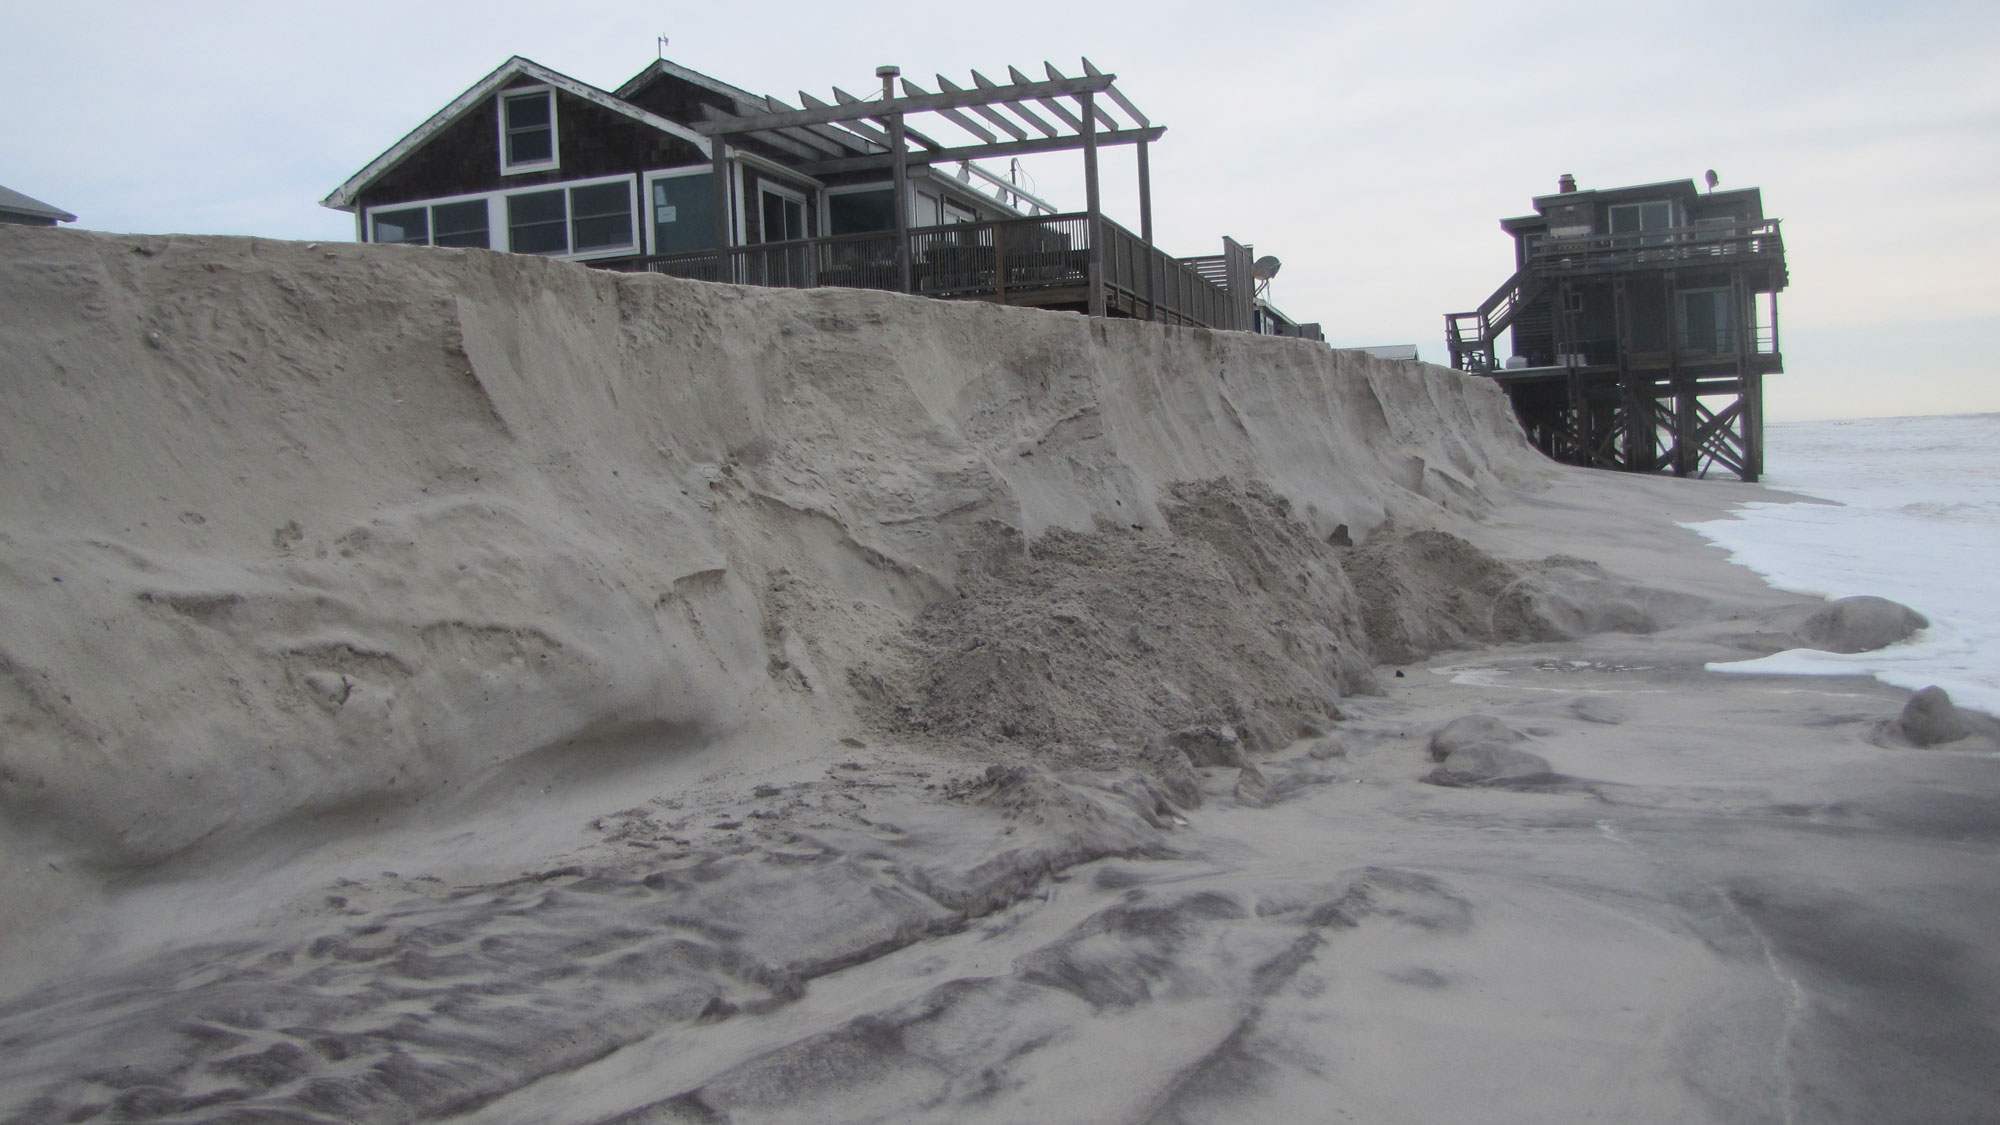 Photograph of erosion of an artificial dune on Fire Island, New York, following hurricane Sandy. The photo shows a dune with a shear face. A house sits on top of dune. In the background, another house stands at the water's edge; it is built on tall scaffolding so that the structure is above water level.